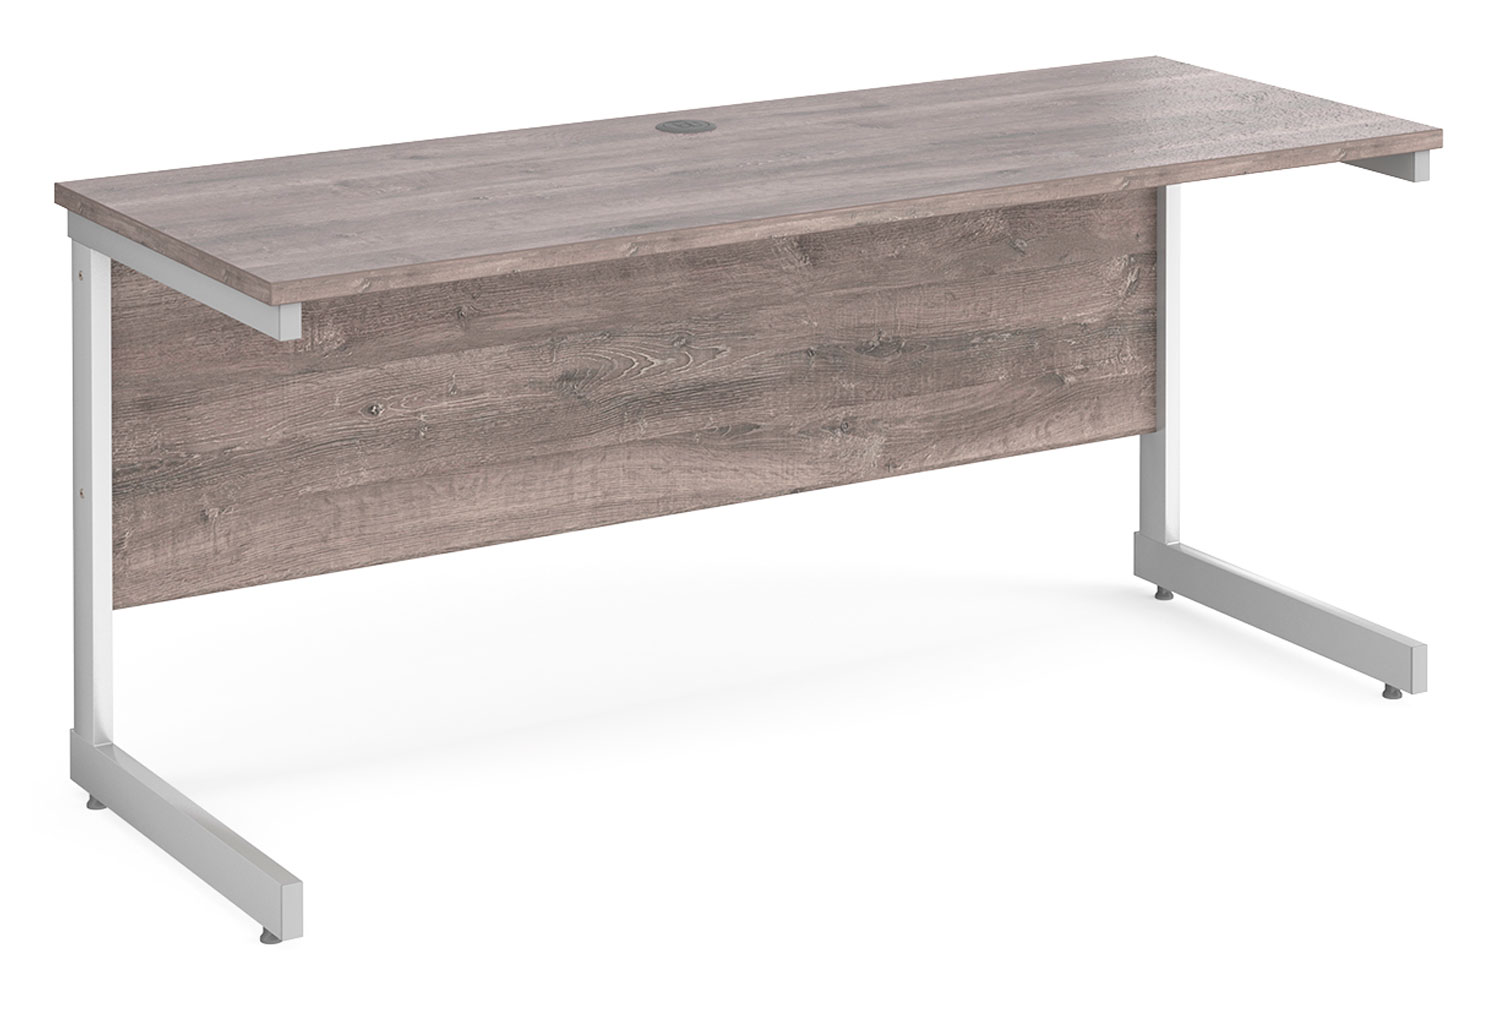 Thrifty Next-Day Narrow Rectangular Office Desk Grey Oak, 160w60dx73h (cm), Express Delivery